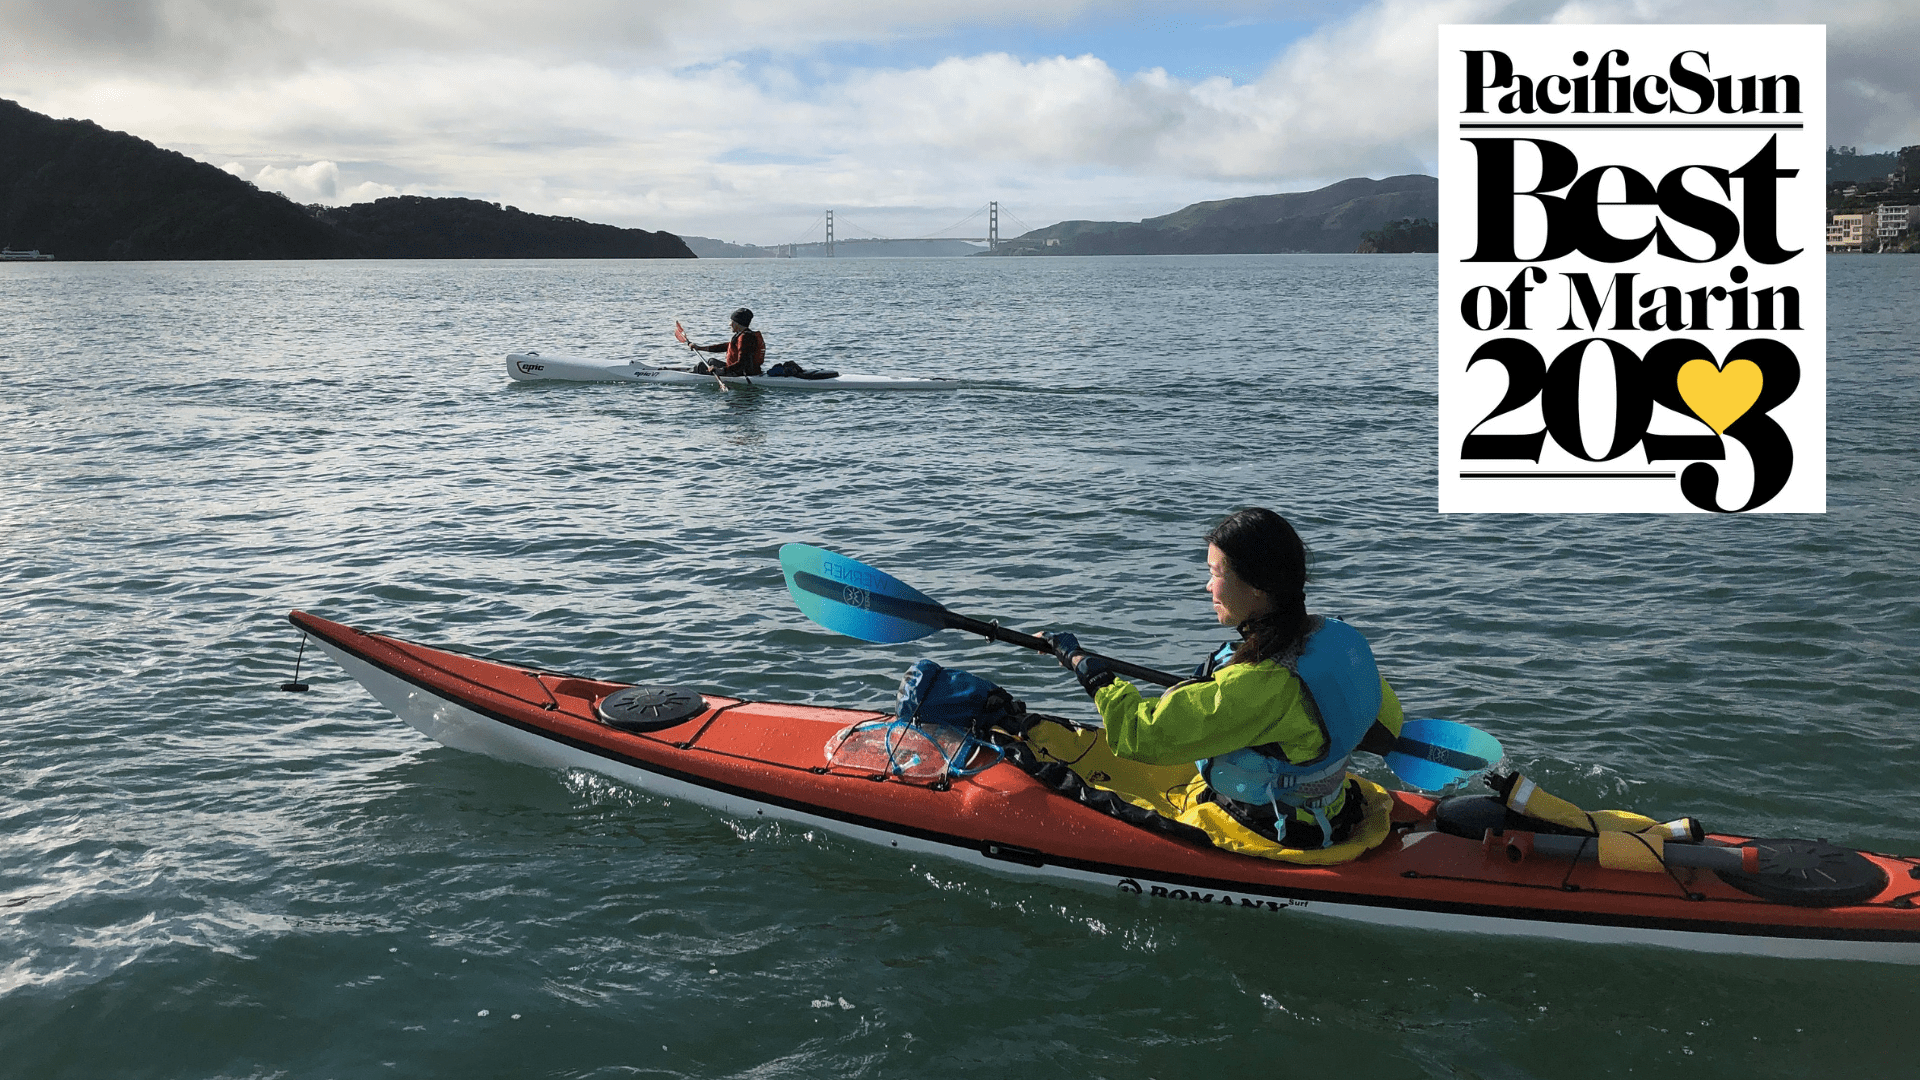 Sea Trek Named “Best Water Sports Company” in Marin by Pacific Sun!